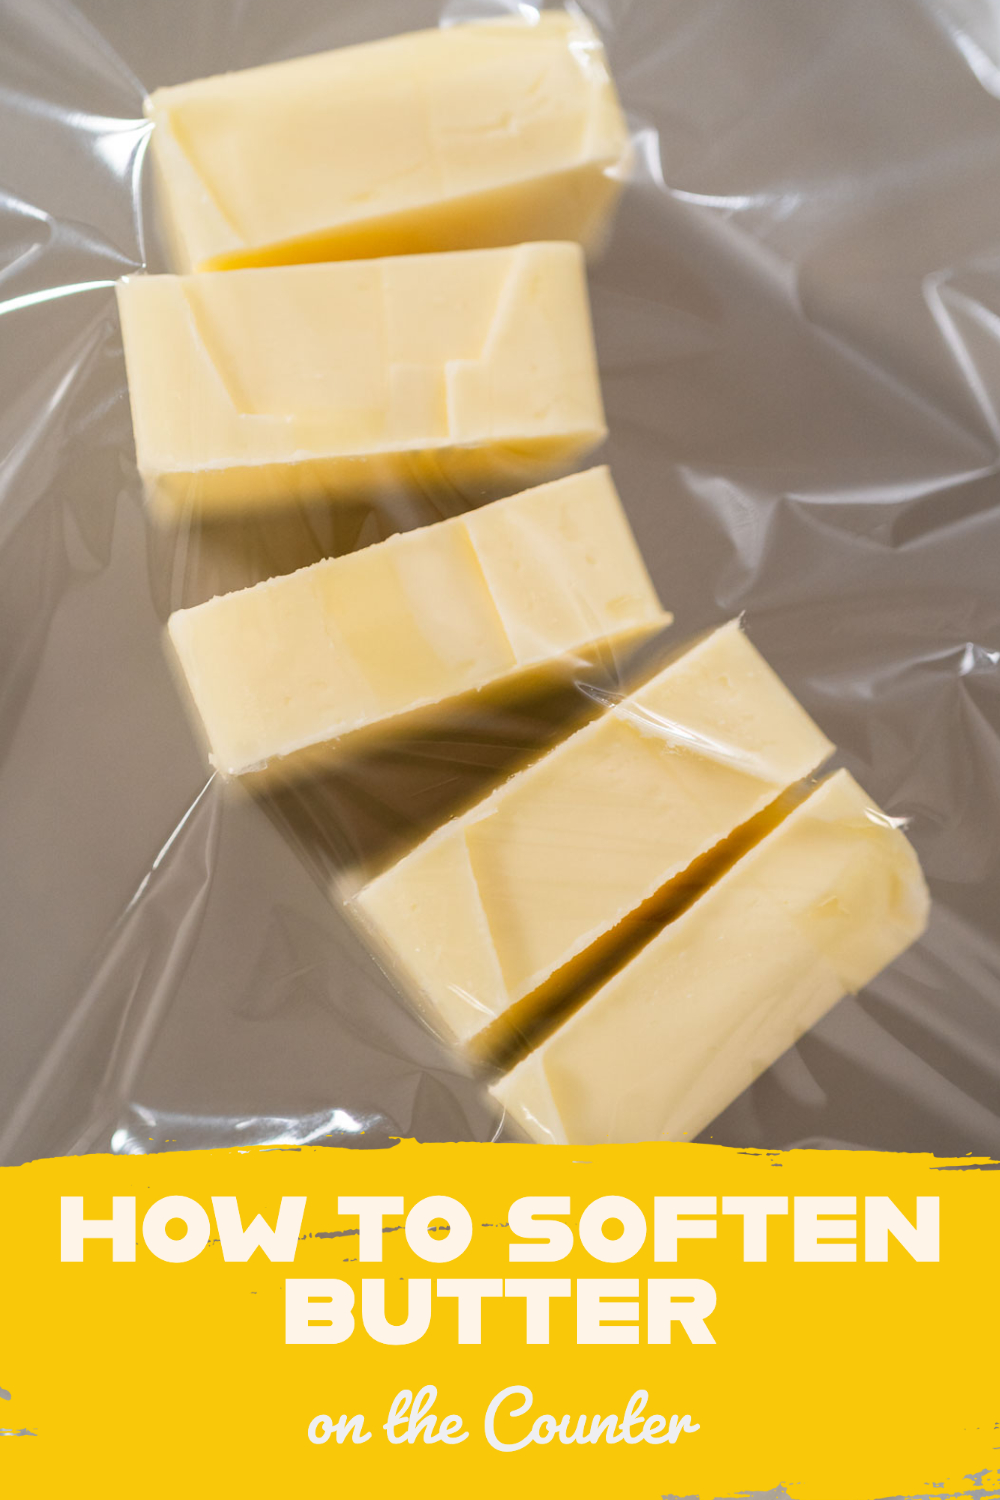 How to Soften Butter on the Counter